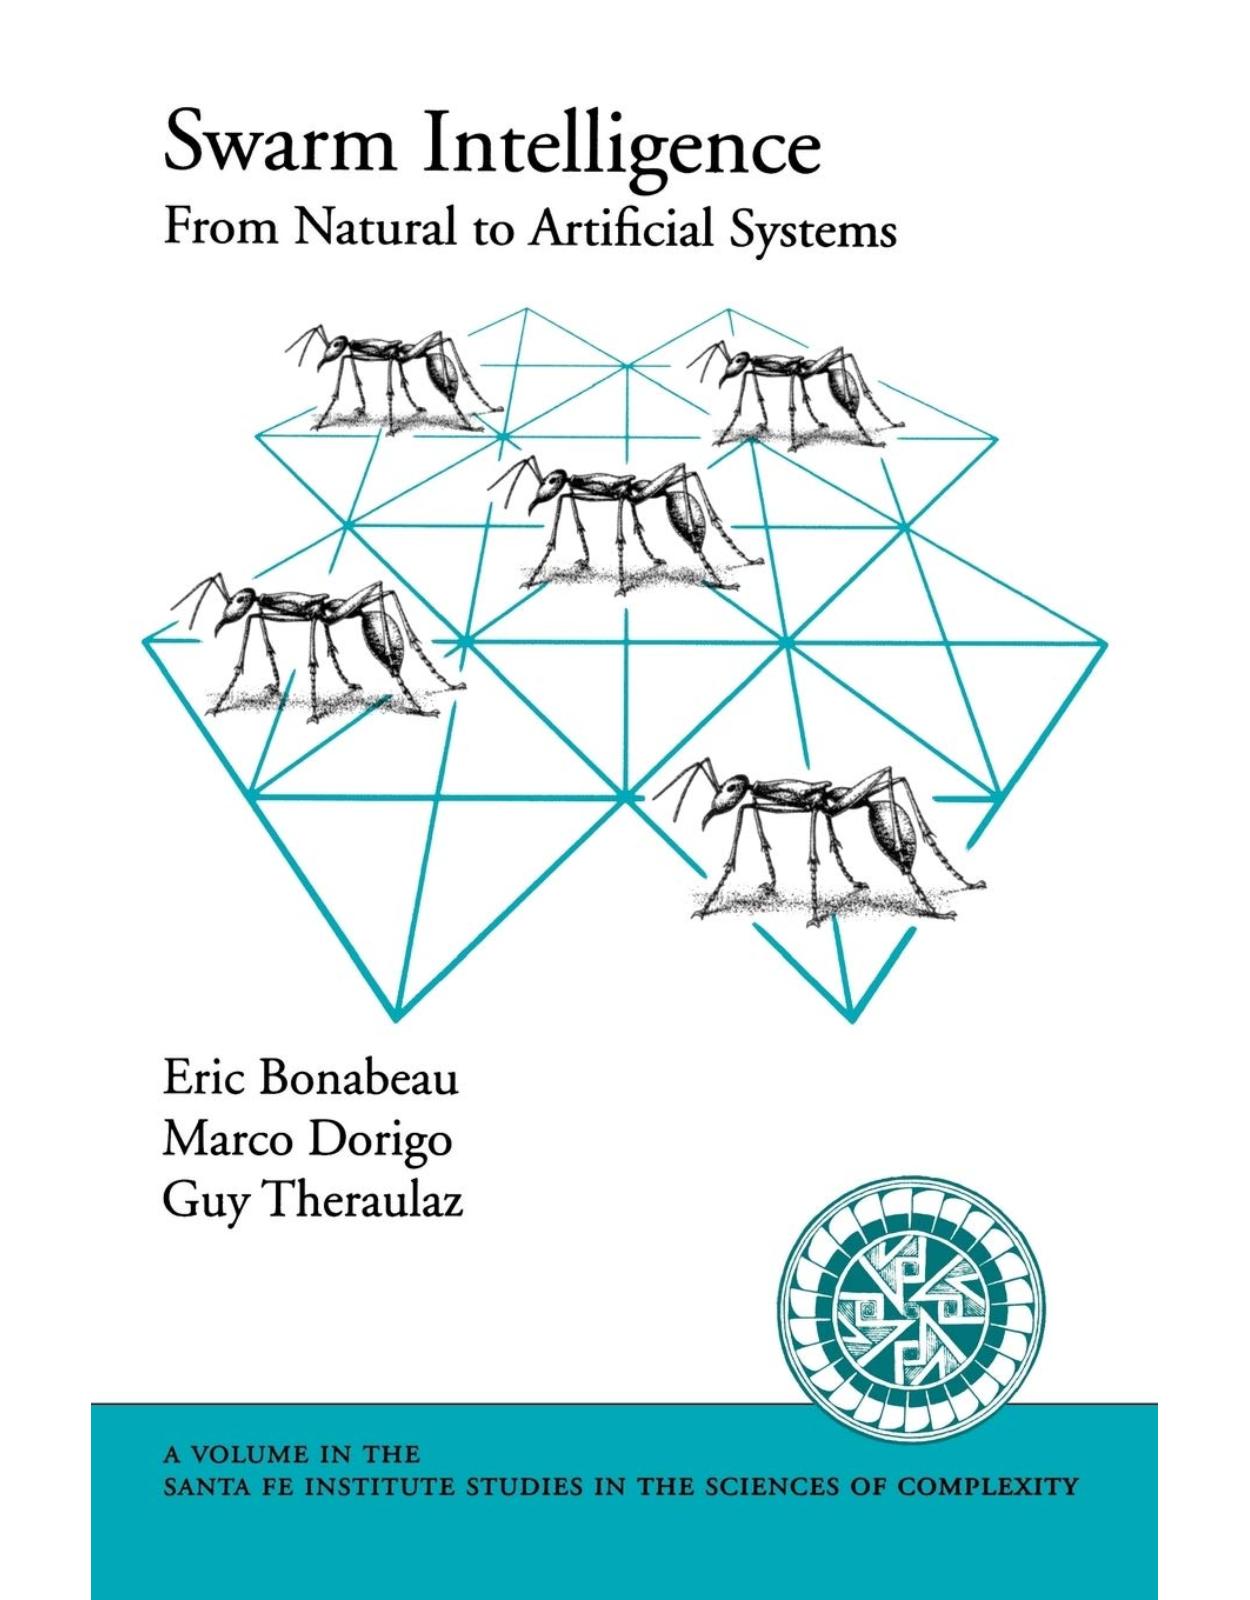 Swarm Intelligence: From Natural to Artificial Systems